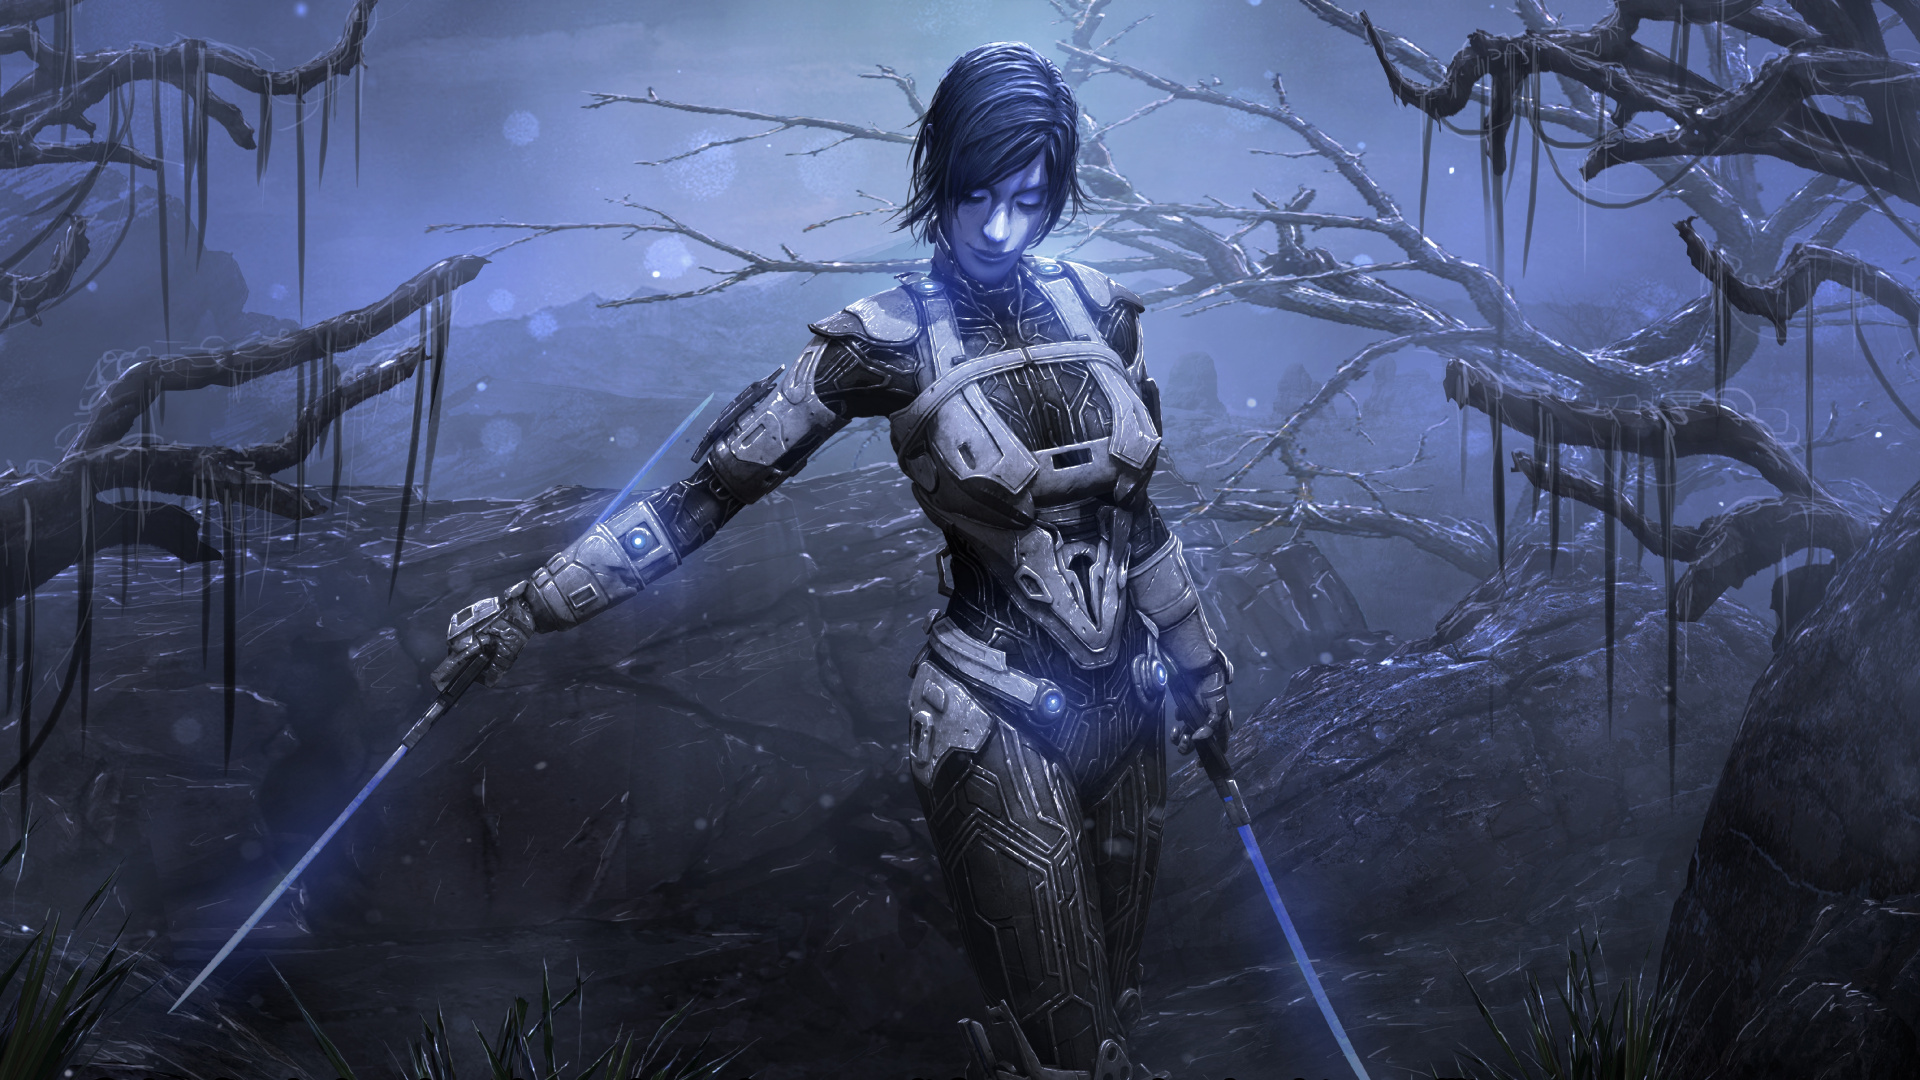 Woman in Black and Blue Suit Holding Black and Blue Weapon. Wallpaper in 1920x1080 Resolution